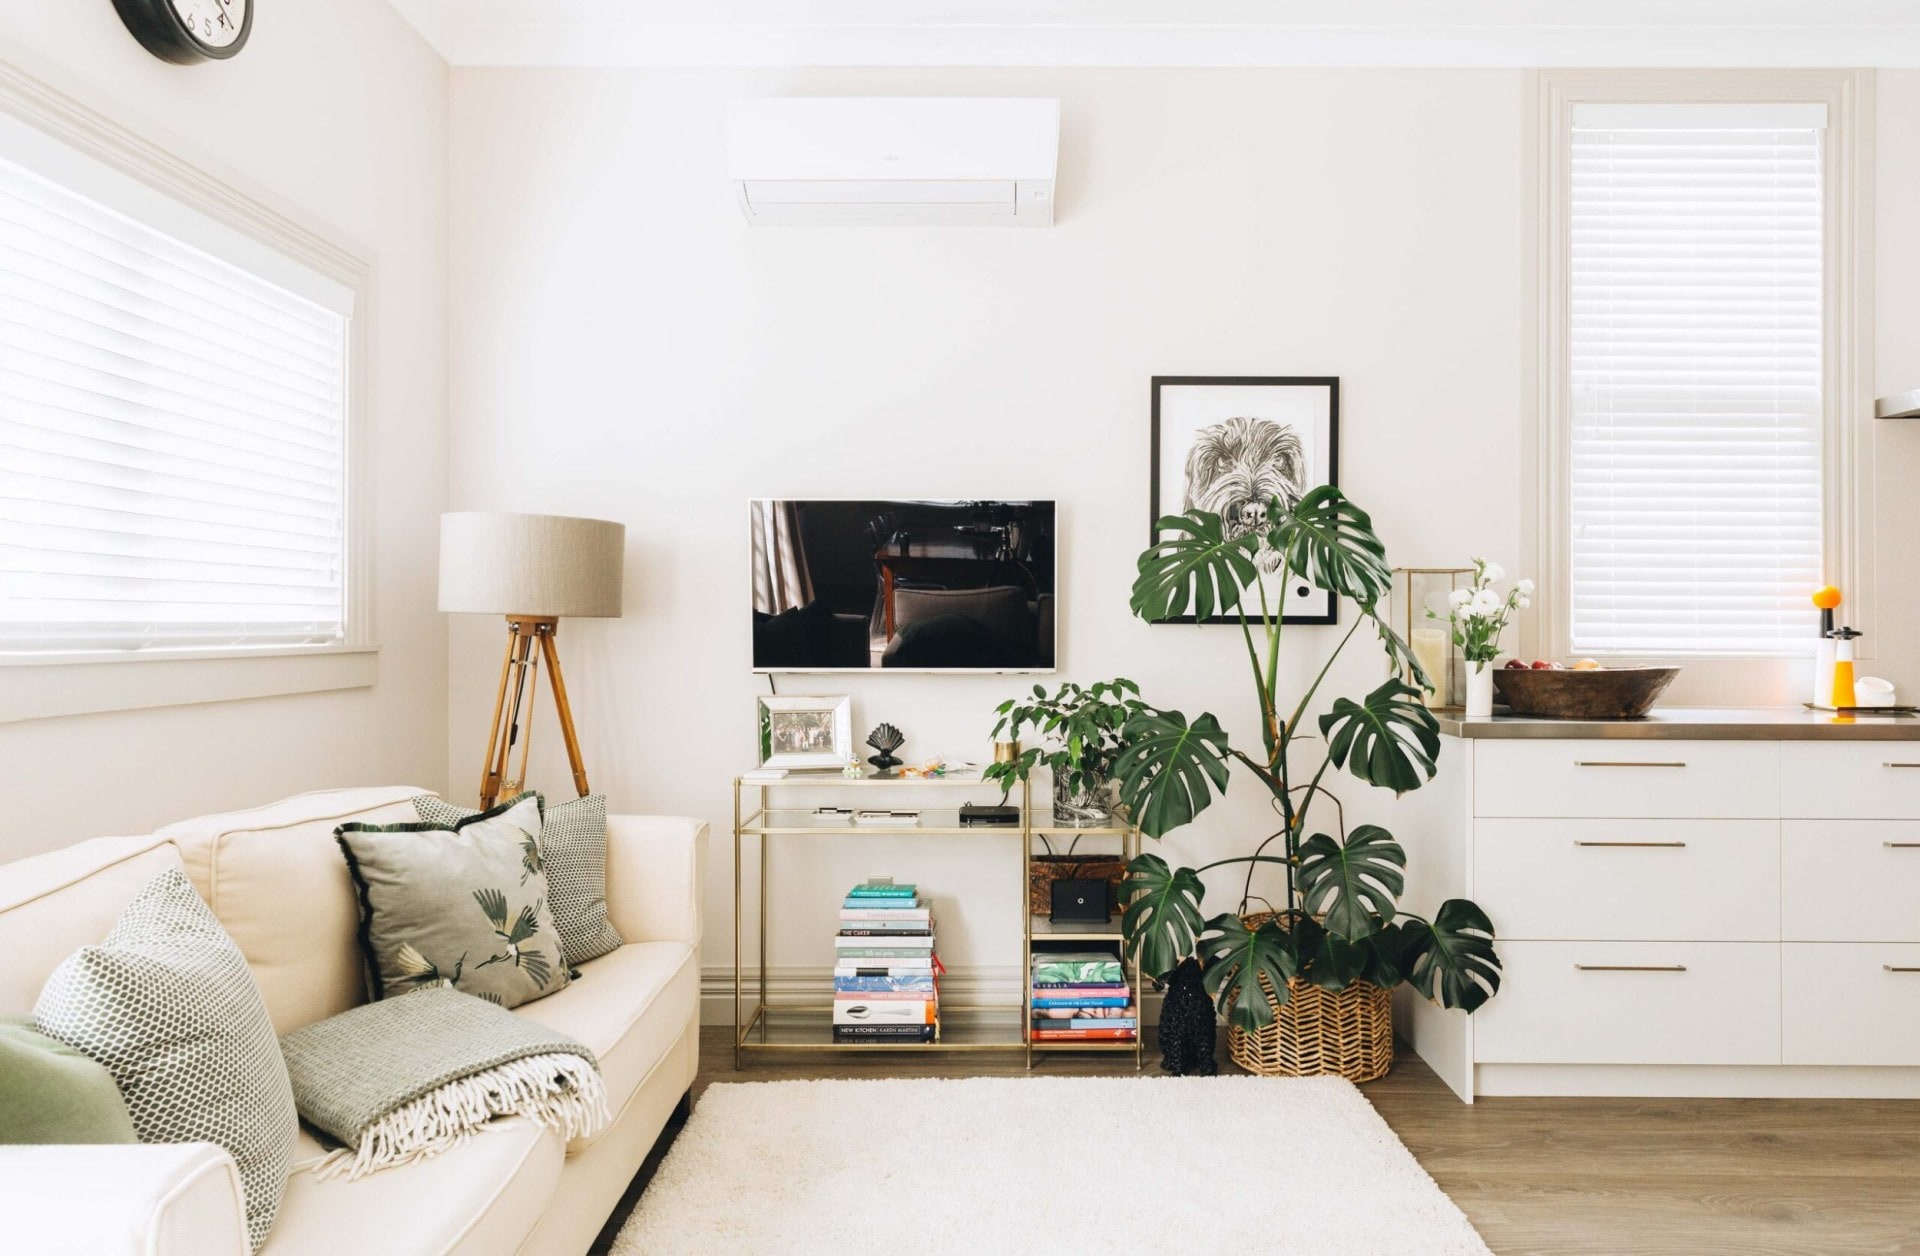 A white living room area with a white couch, drawers, a monstera plant in a brown natural pot and a hanging TV